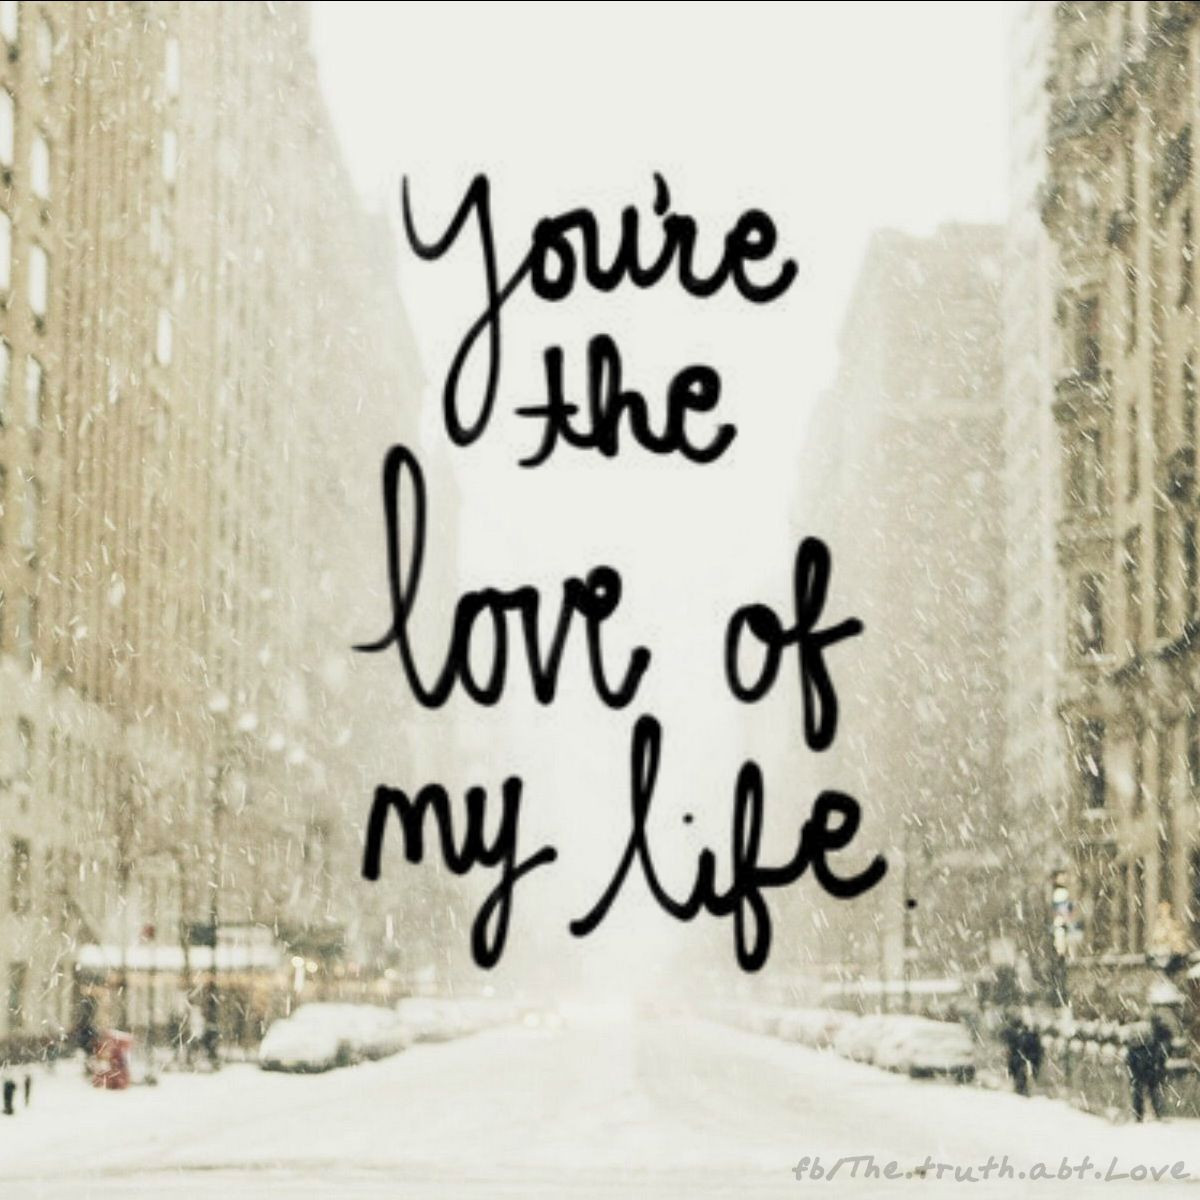 My Love My Life Quotes
 Love My Life s and for